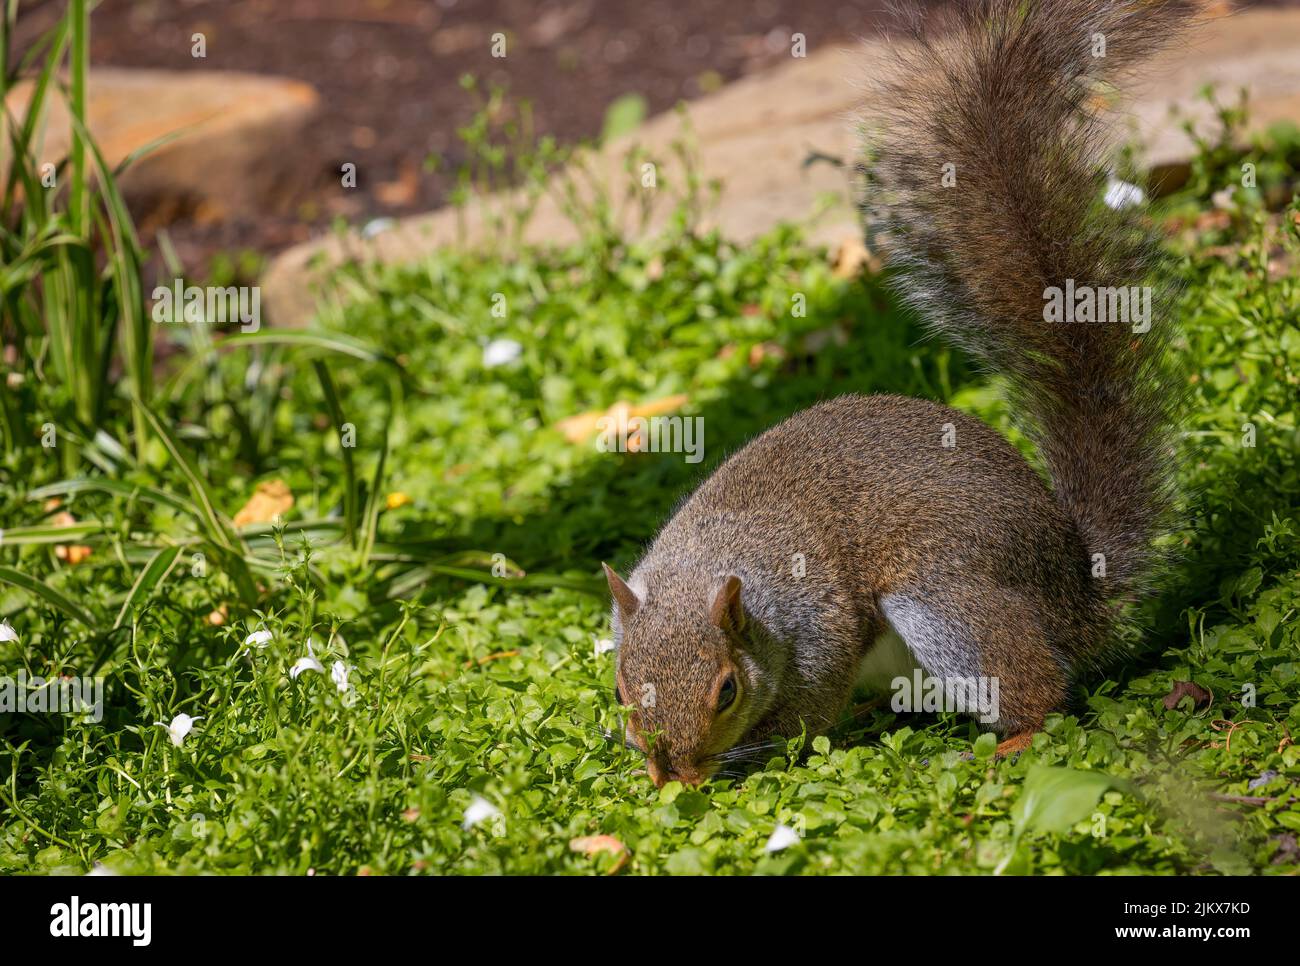 A gray squirrel forages for food in backyard. Stock Photo